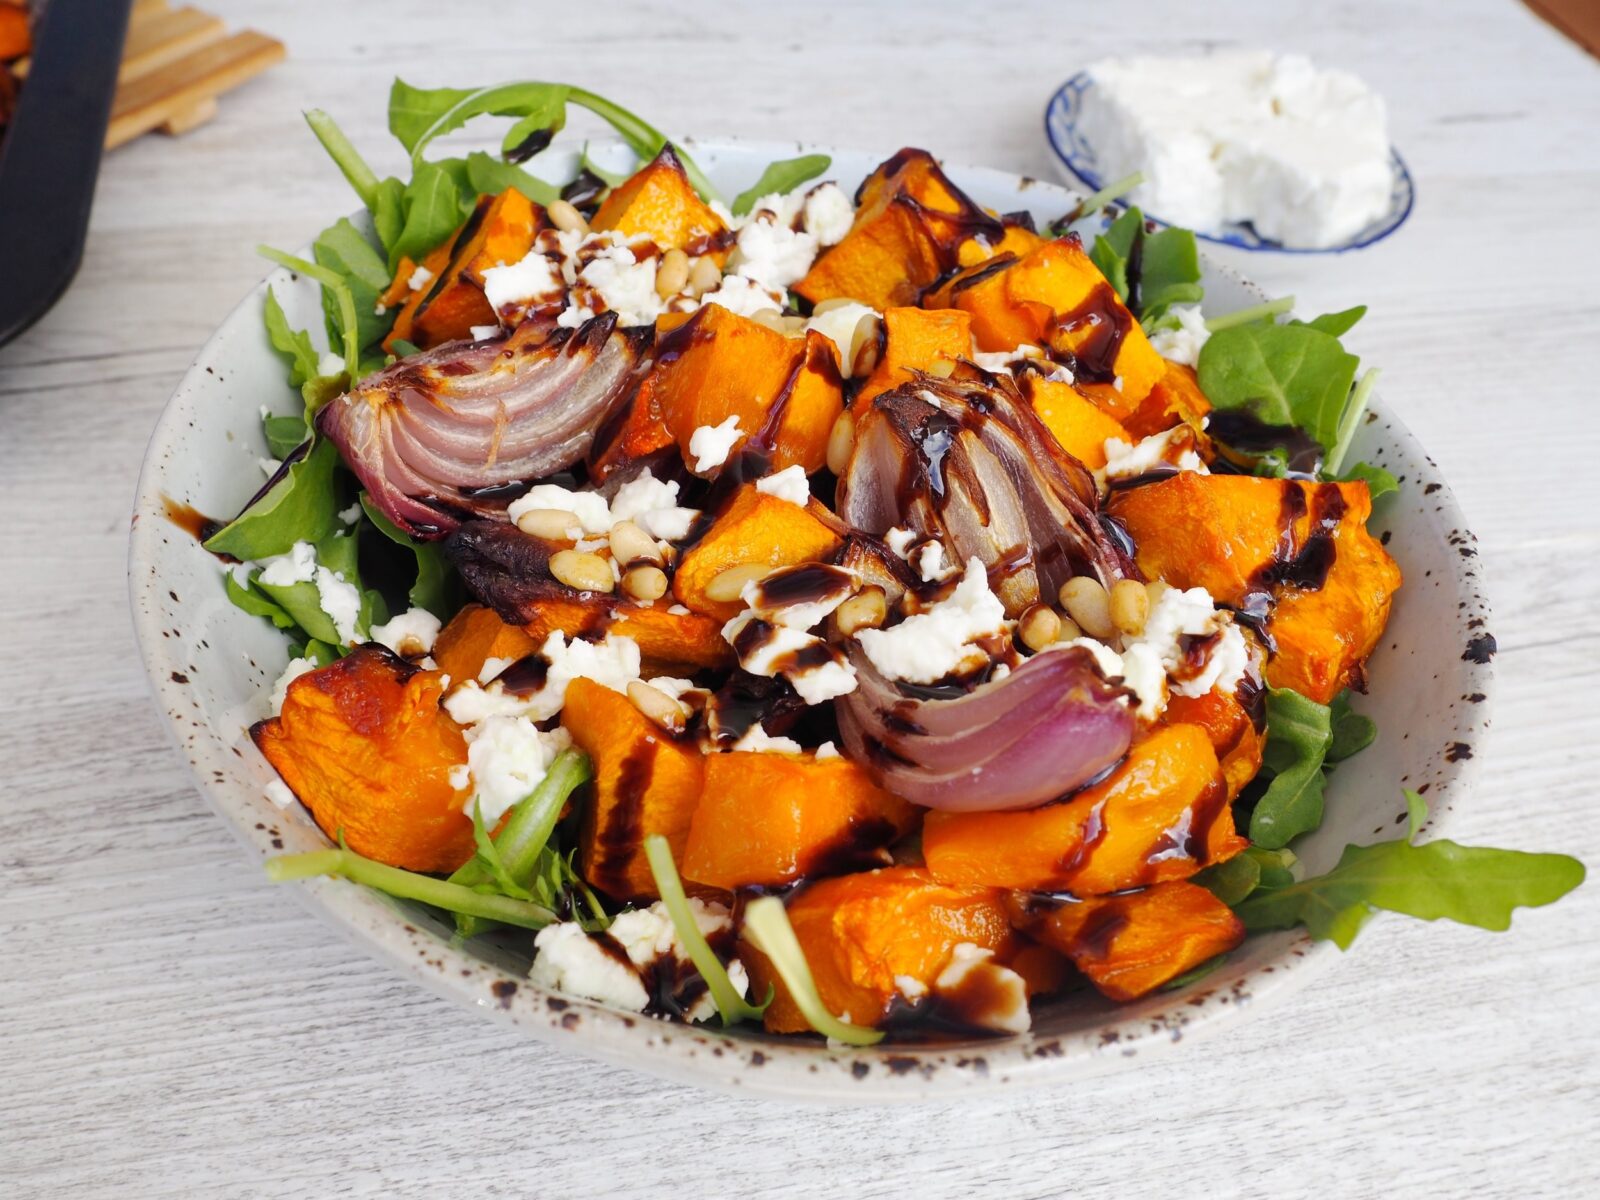 Click the image to get this recipe: Pumpkin and Feta Salad (with dressing)! Image: Lyndi Cohen